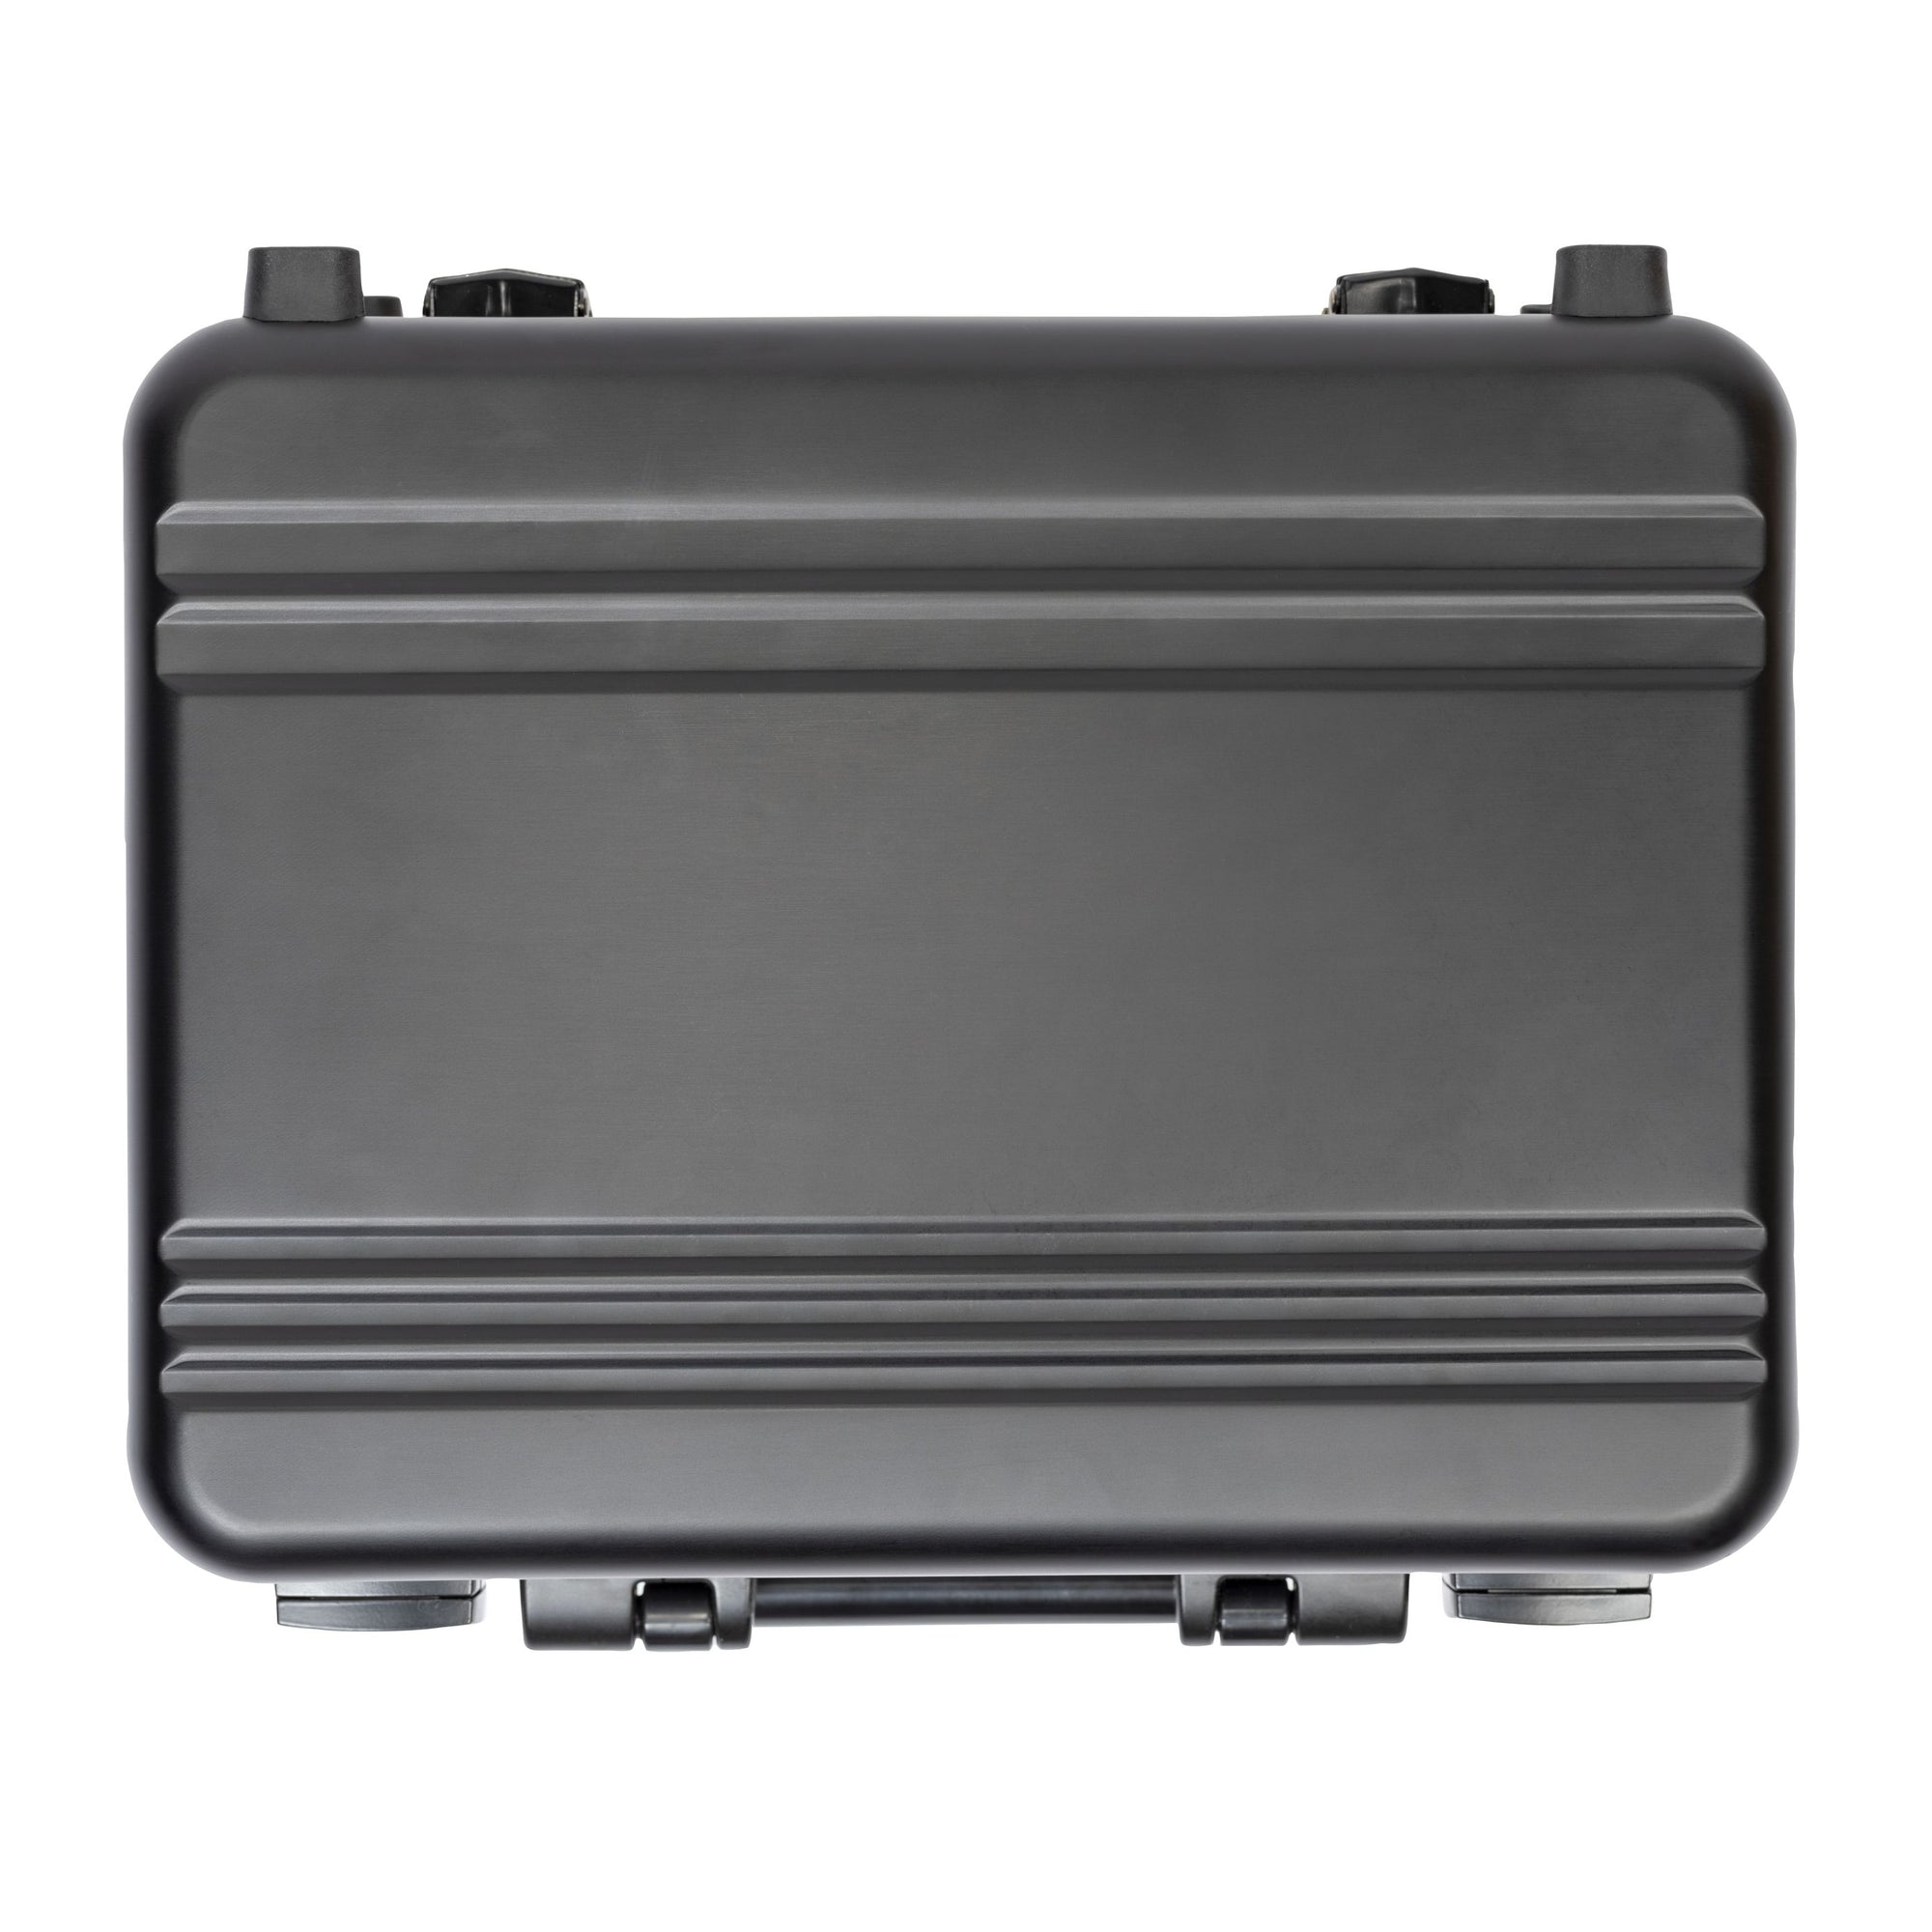 Aluminum Travel Case for LCD-5 and CRBN Top viewAluminum Travel Case for LCD-5 and CRBN top view